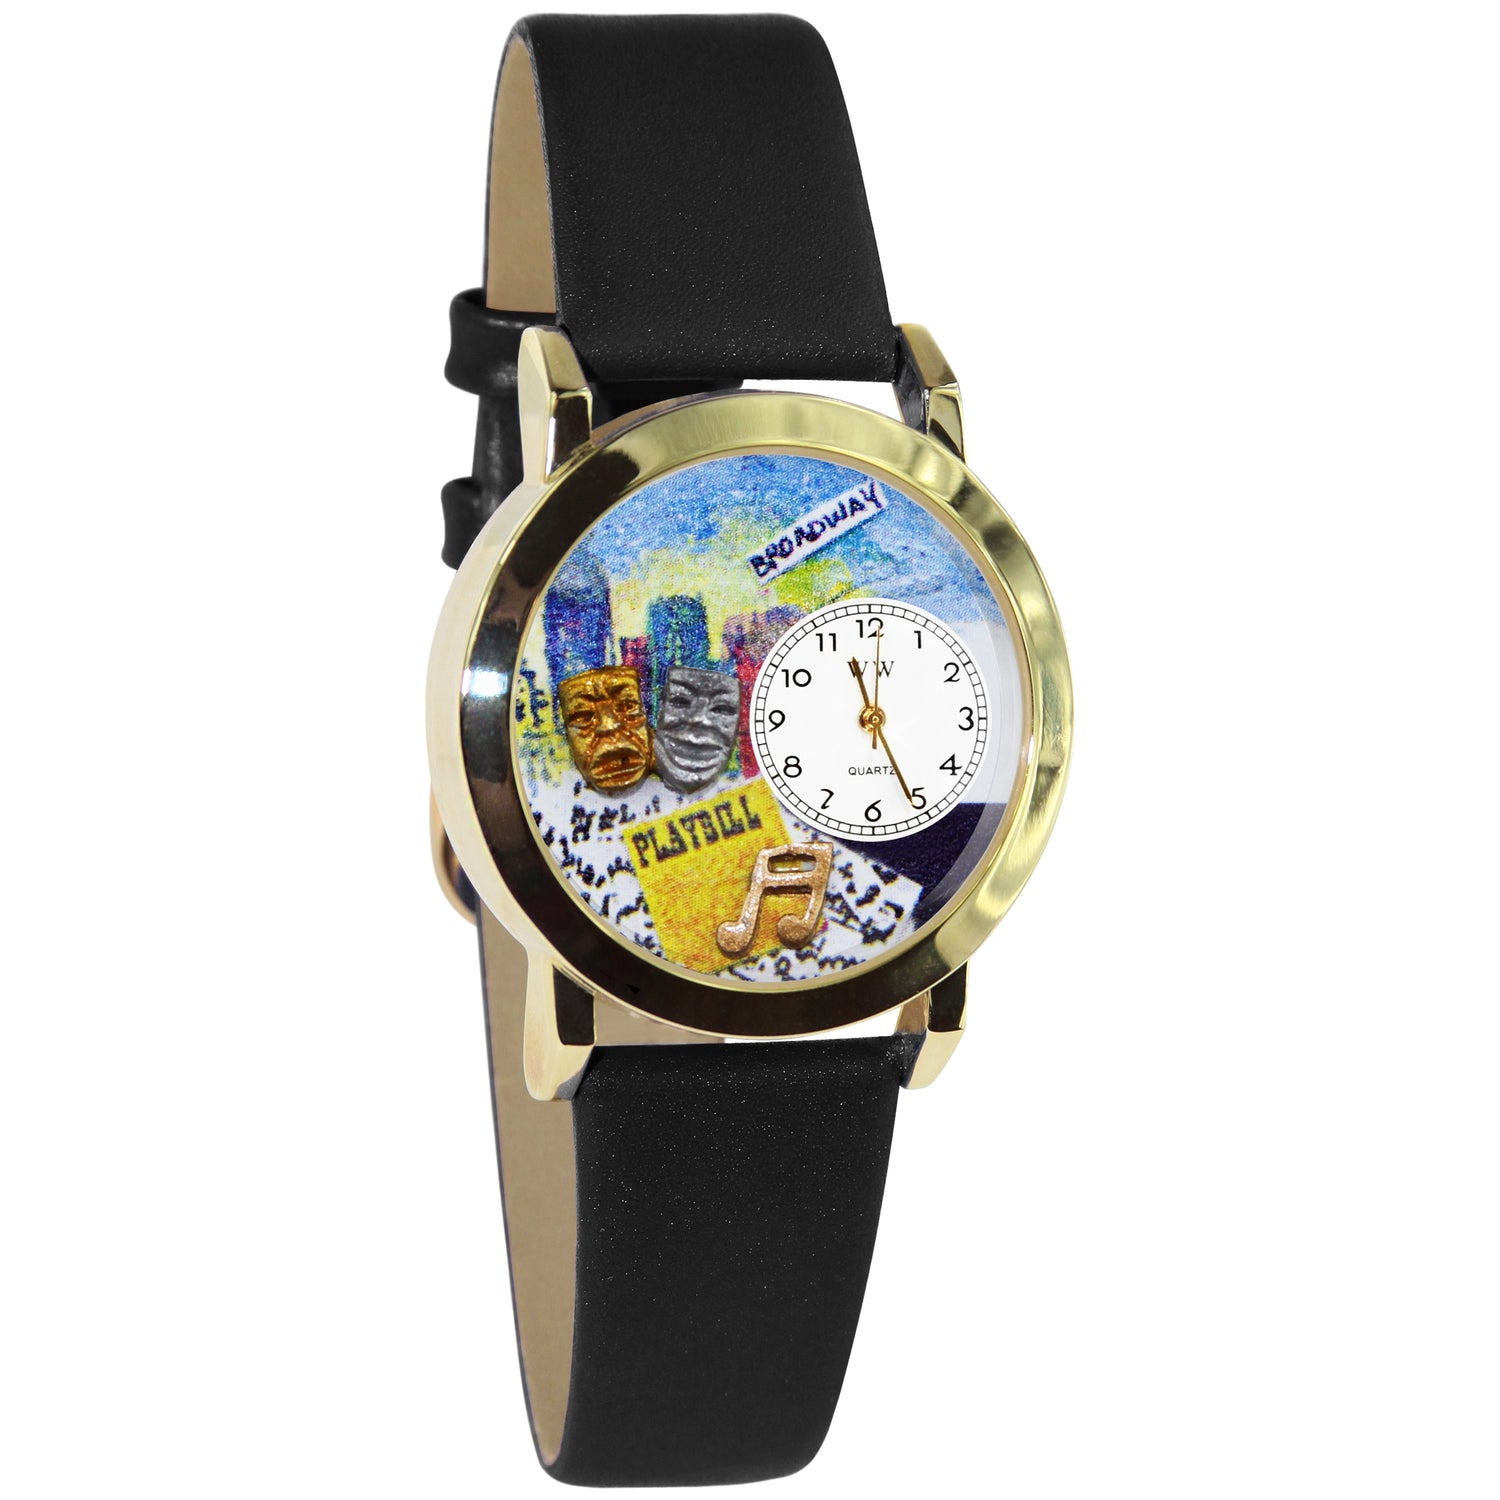 Whimsical Gifts | Drama Theater 3D Watch Small Style | Handmade in USA | Hobbies & Special Interests | Arts & Performance | Novelty Unique Fun Miniatures Gift | Gold Finish Black Leather Watch Band